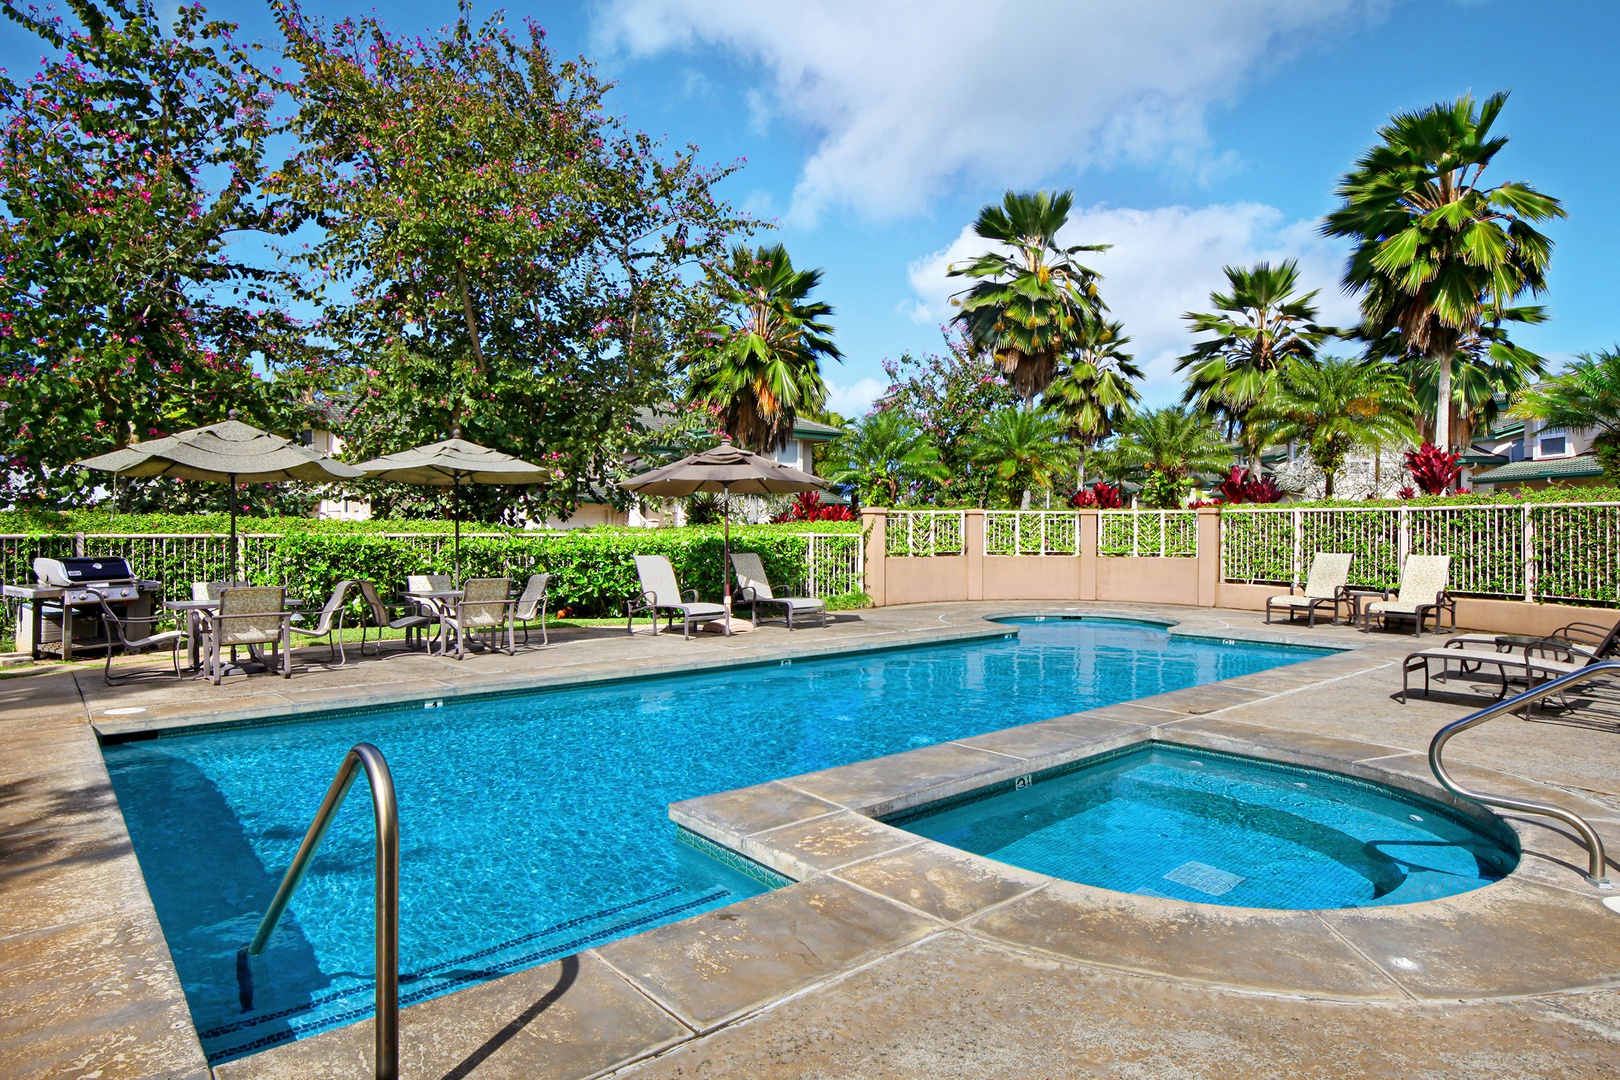 Princeville Vacation Rentals, Villas of Kamalii #35 - Relax at the community pool and spa